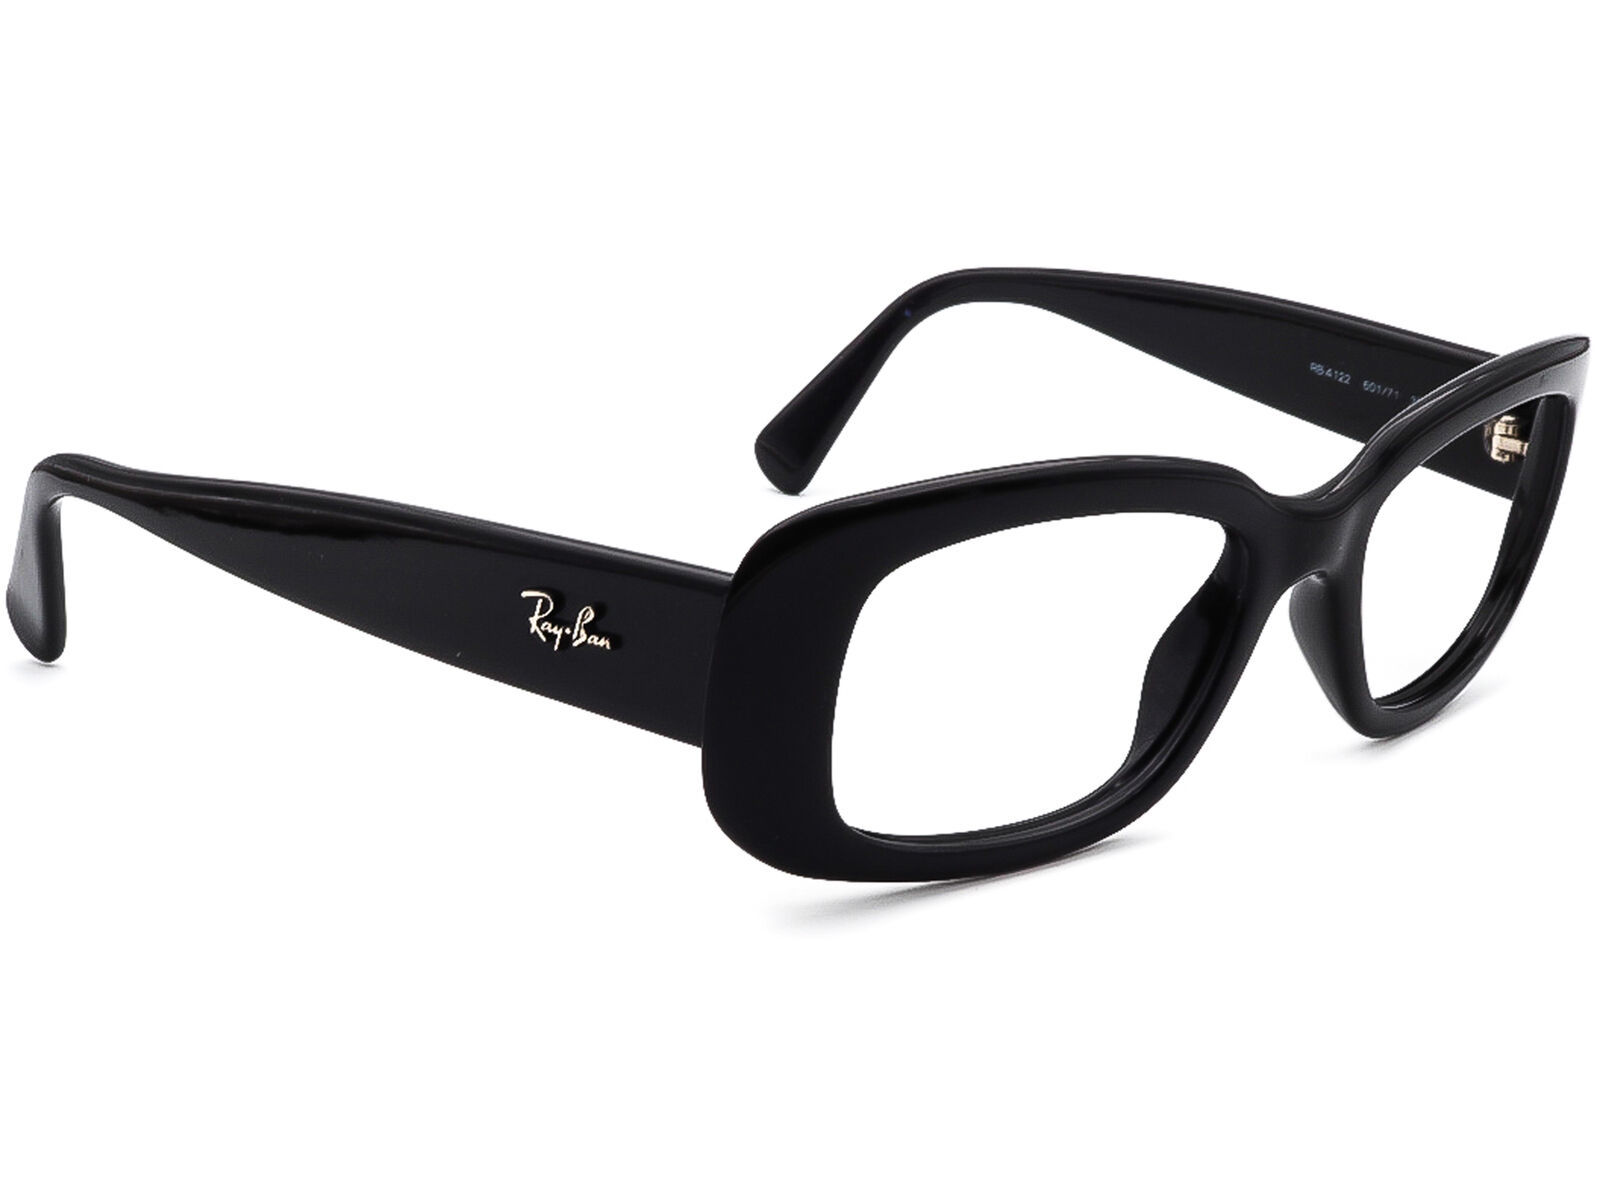 Primary image for Ray Ban Sunglasses FRAME ONLY RB 4122 601/71 Black Square Italy 50[]17 130